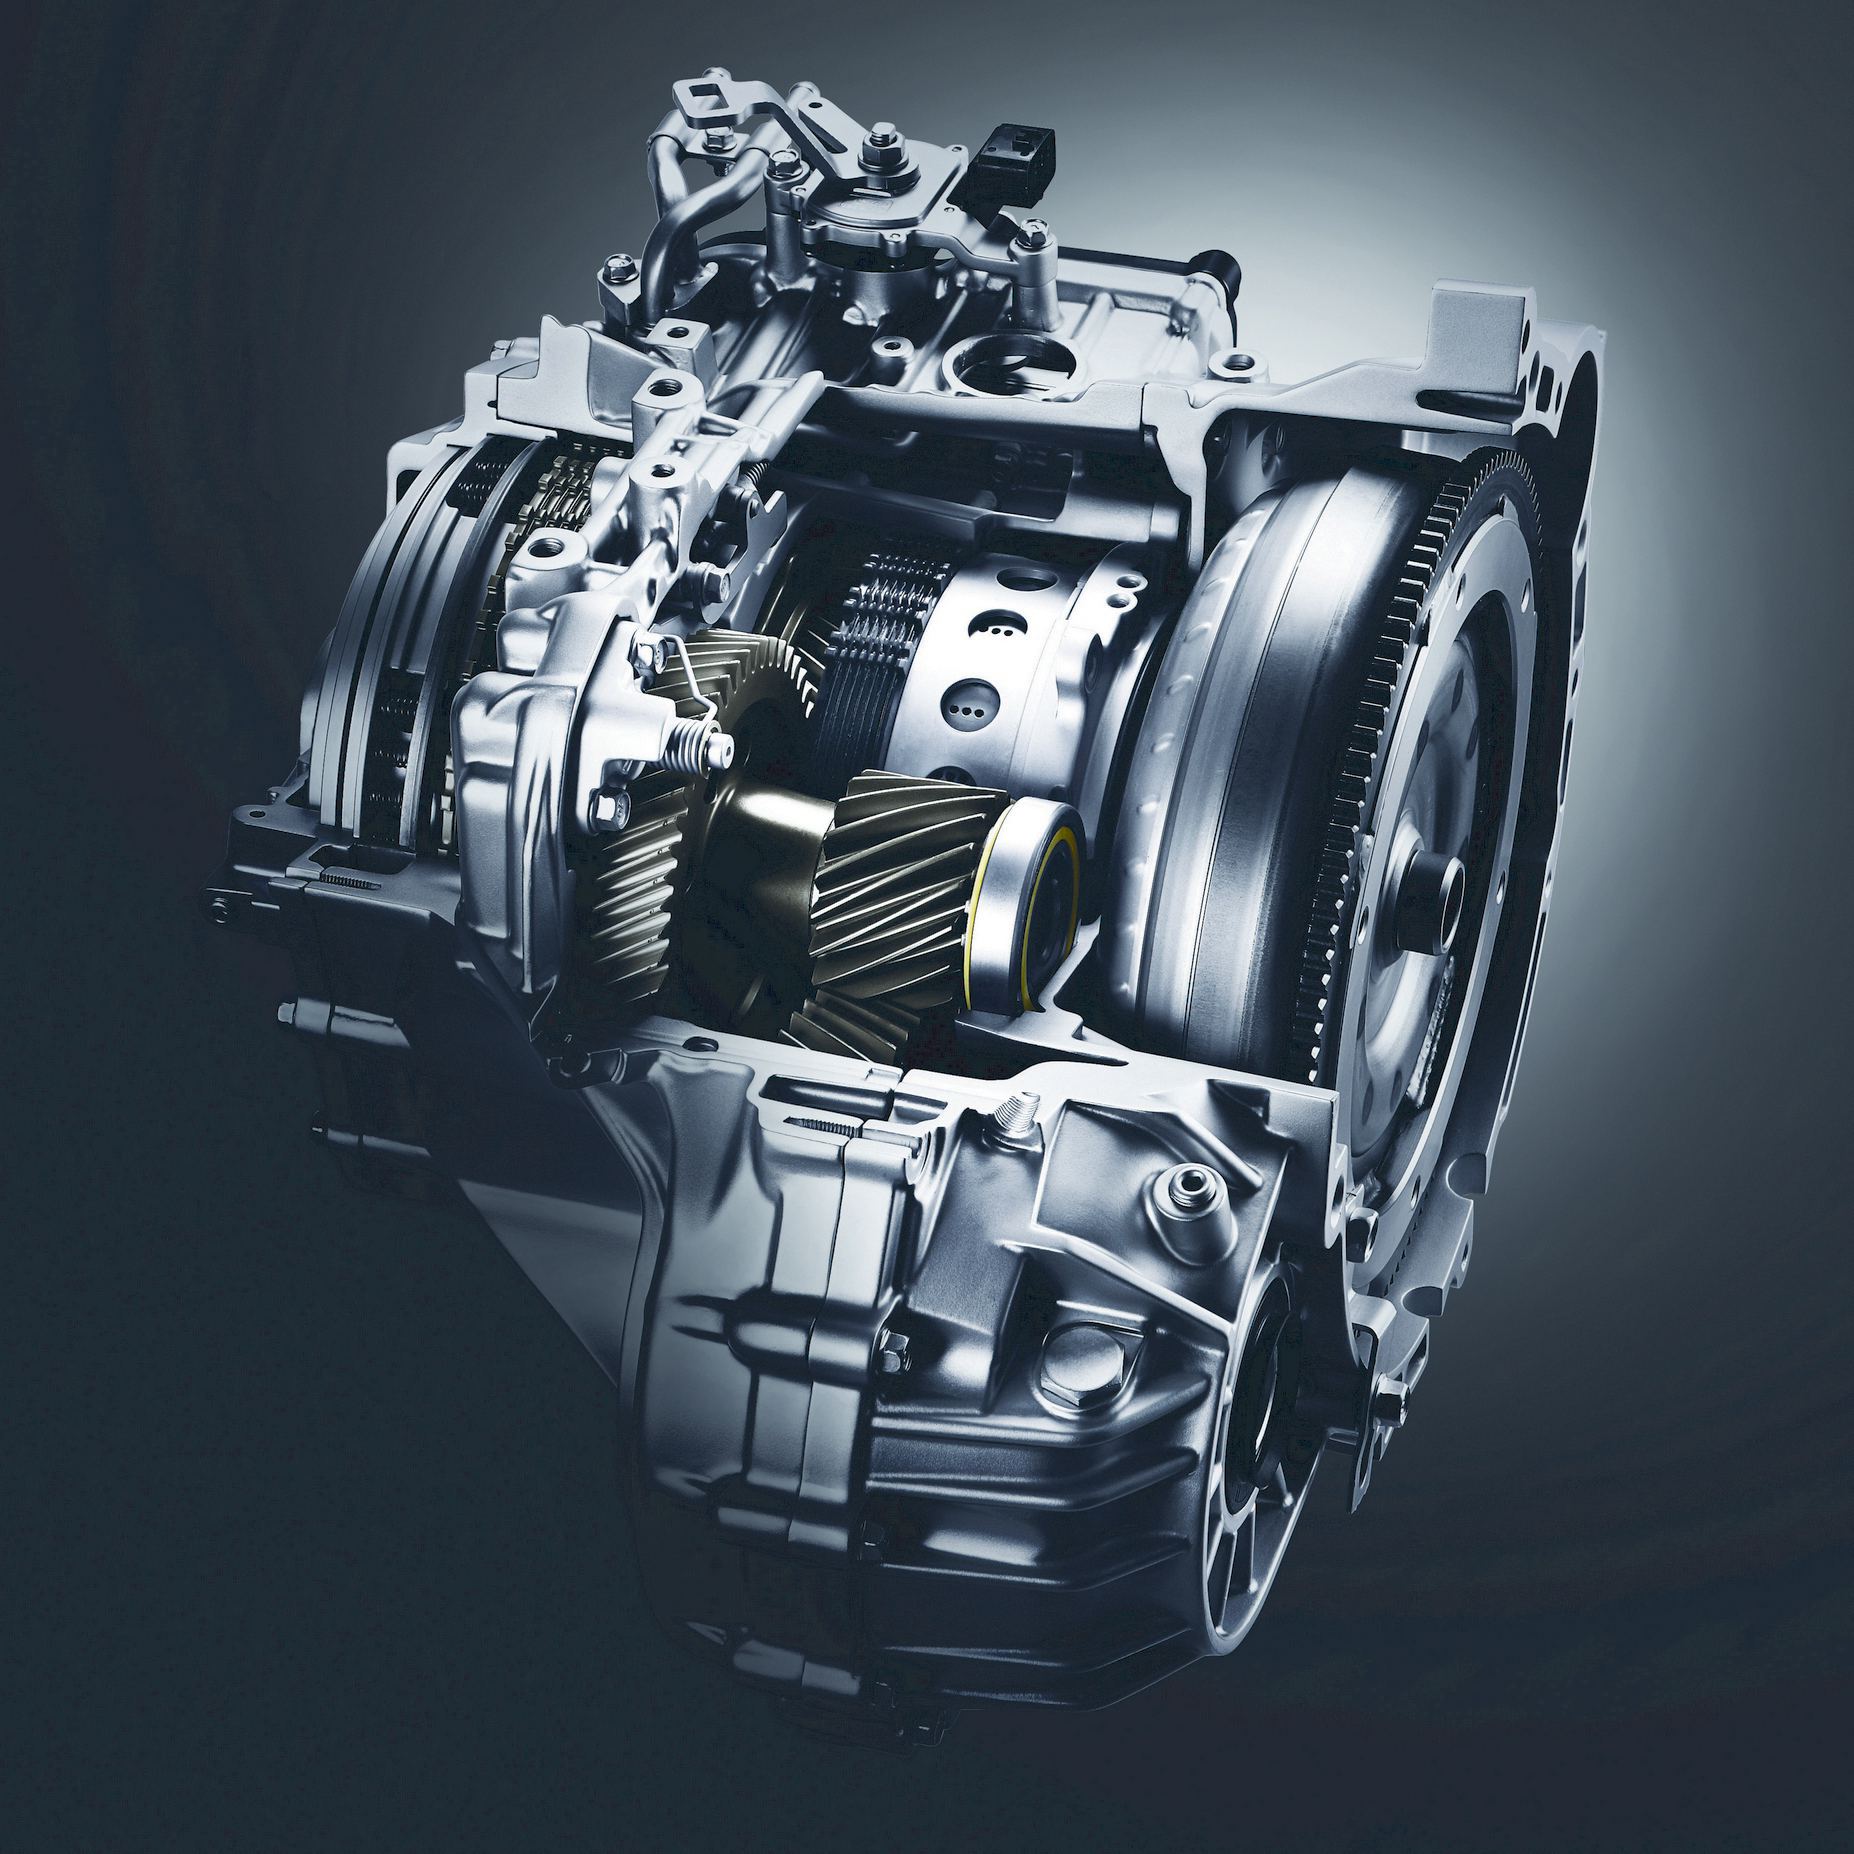 Kia Introduces its First Front-Wheel Drive Eight-Speed Automatic Transmission [Update Video]